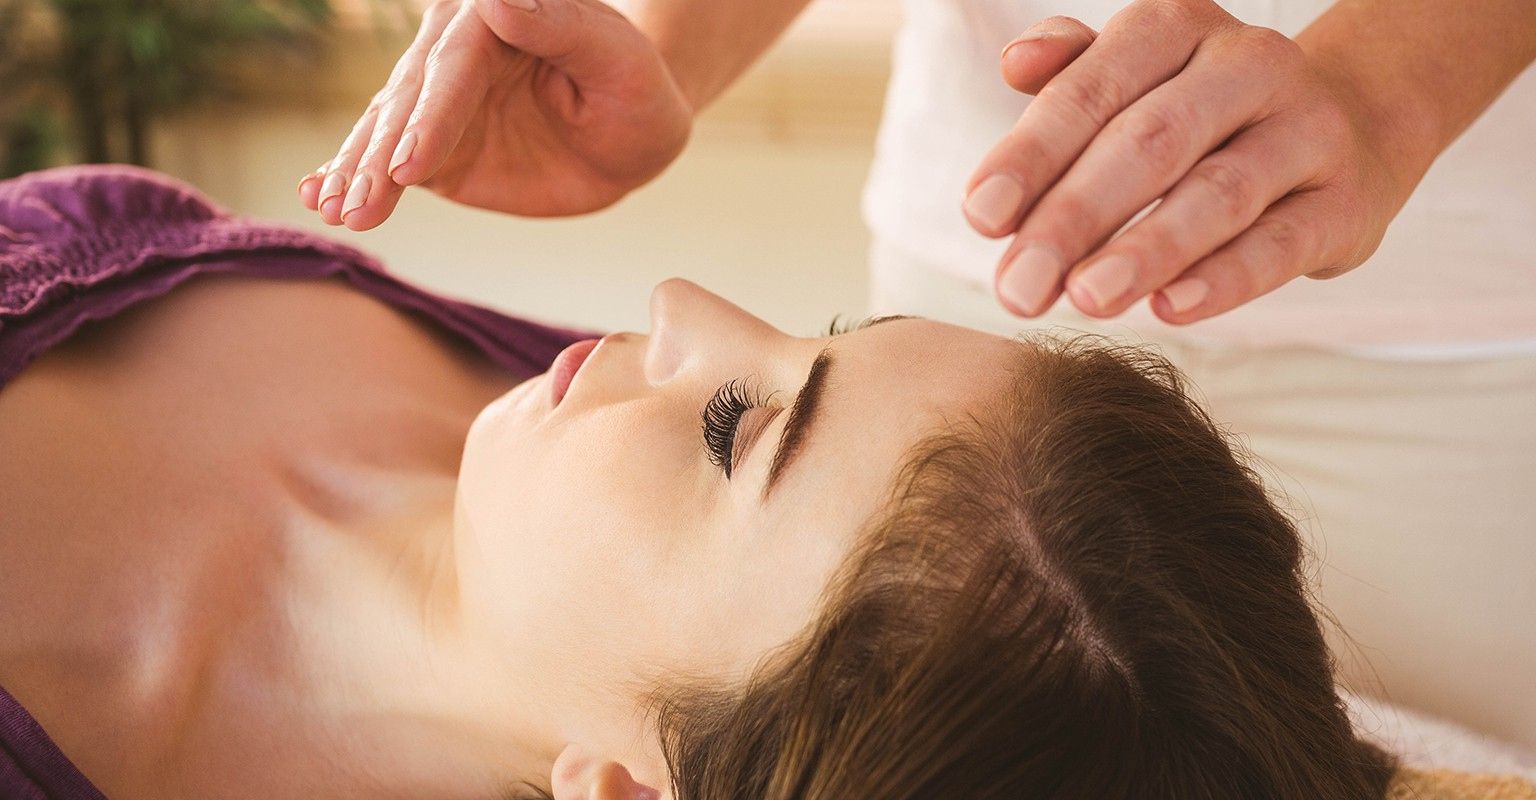 The 10 Best Reiki Masters in Seattle, WA (with Free Estimates)